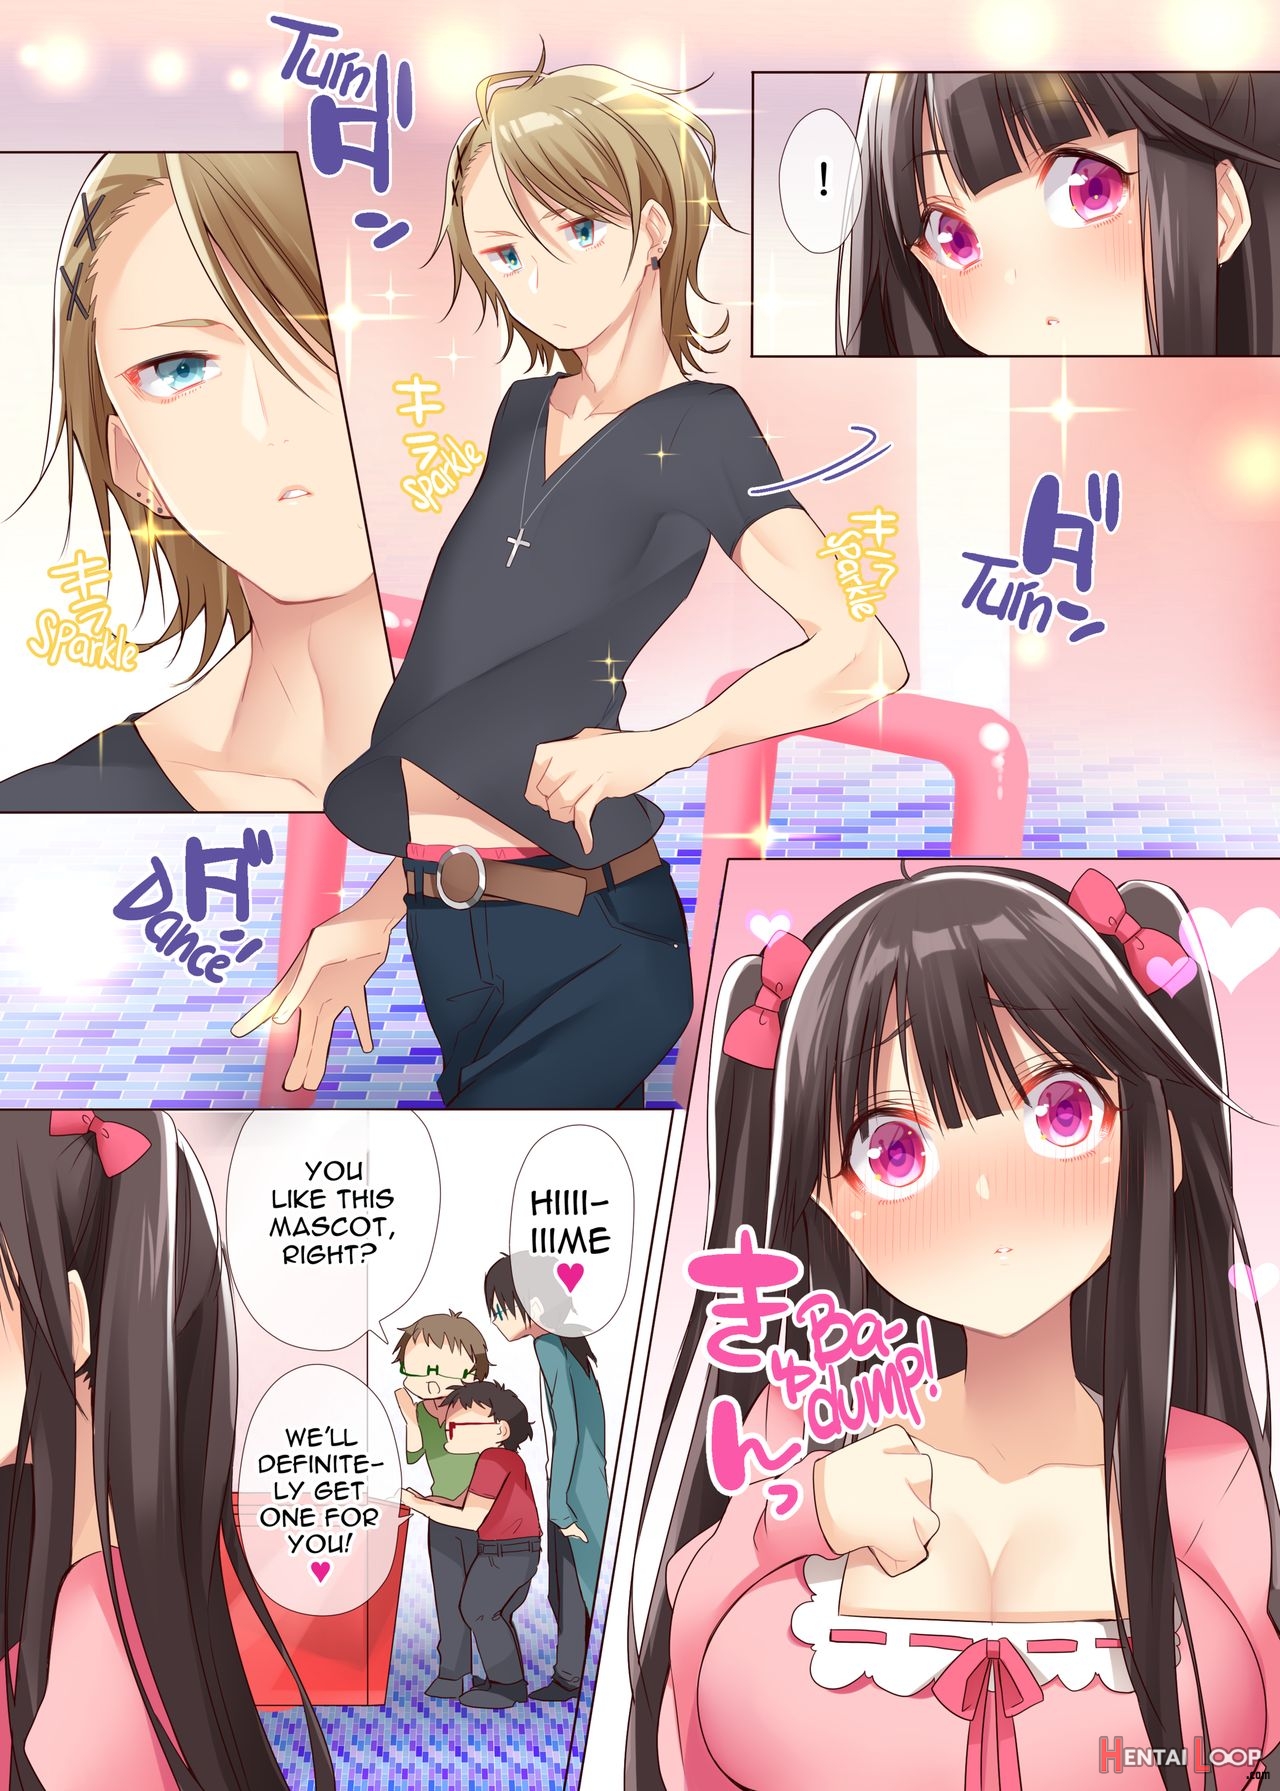 The Princess Of An Otaku Group Got Knocked Up By Some Piece Of Trash So She Let An Otaku Guy Do Her Too!? page 3